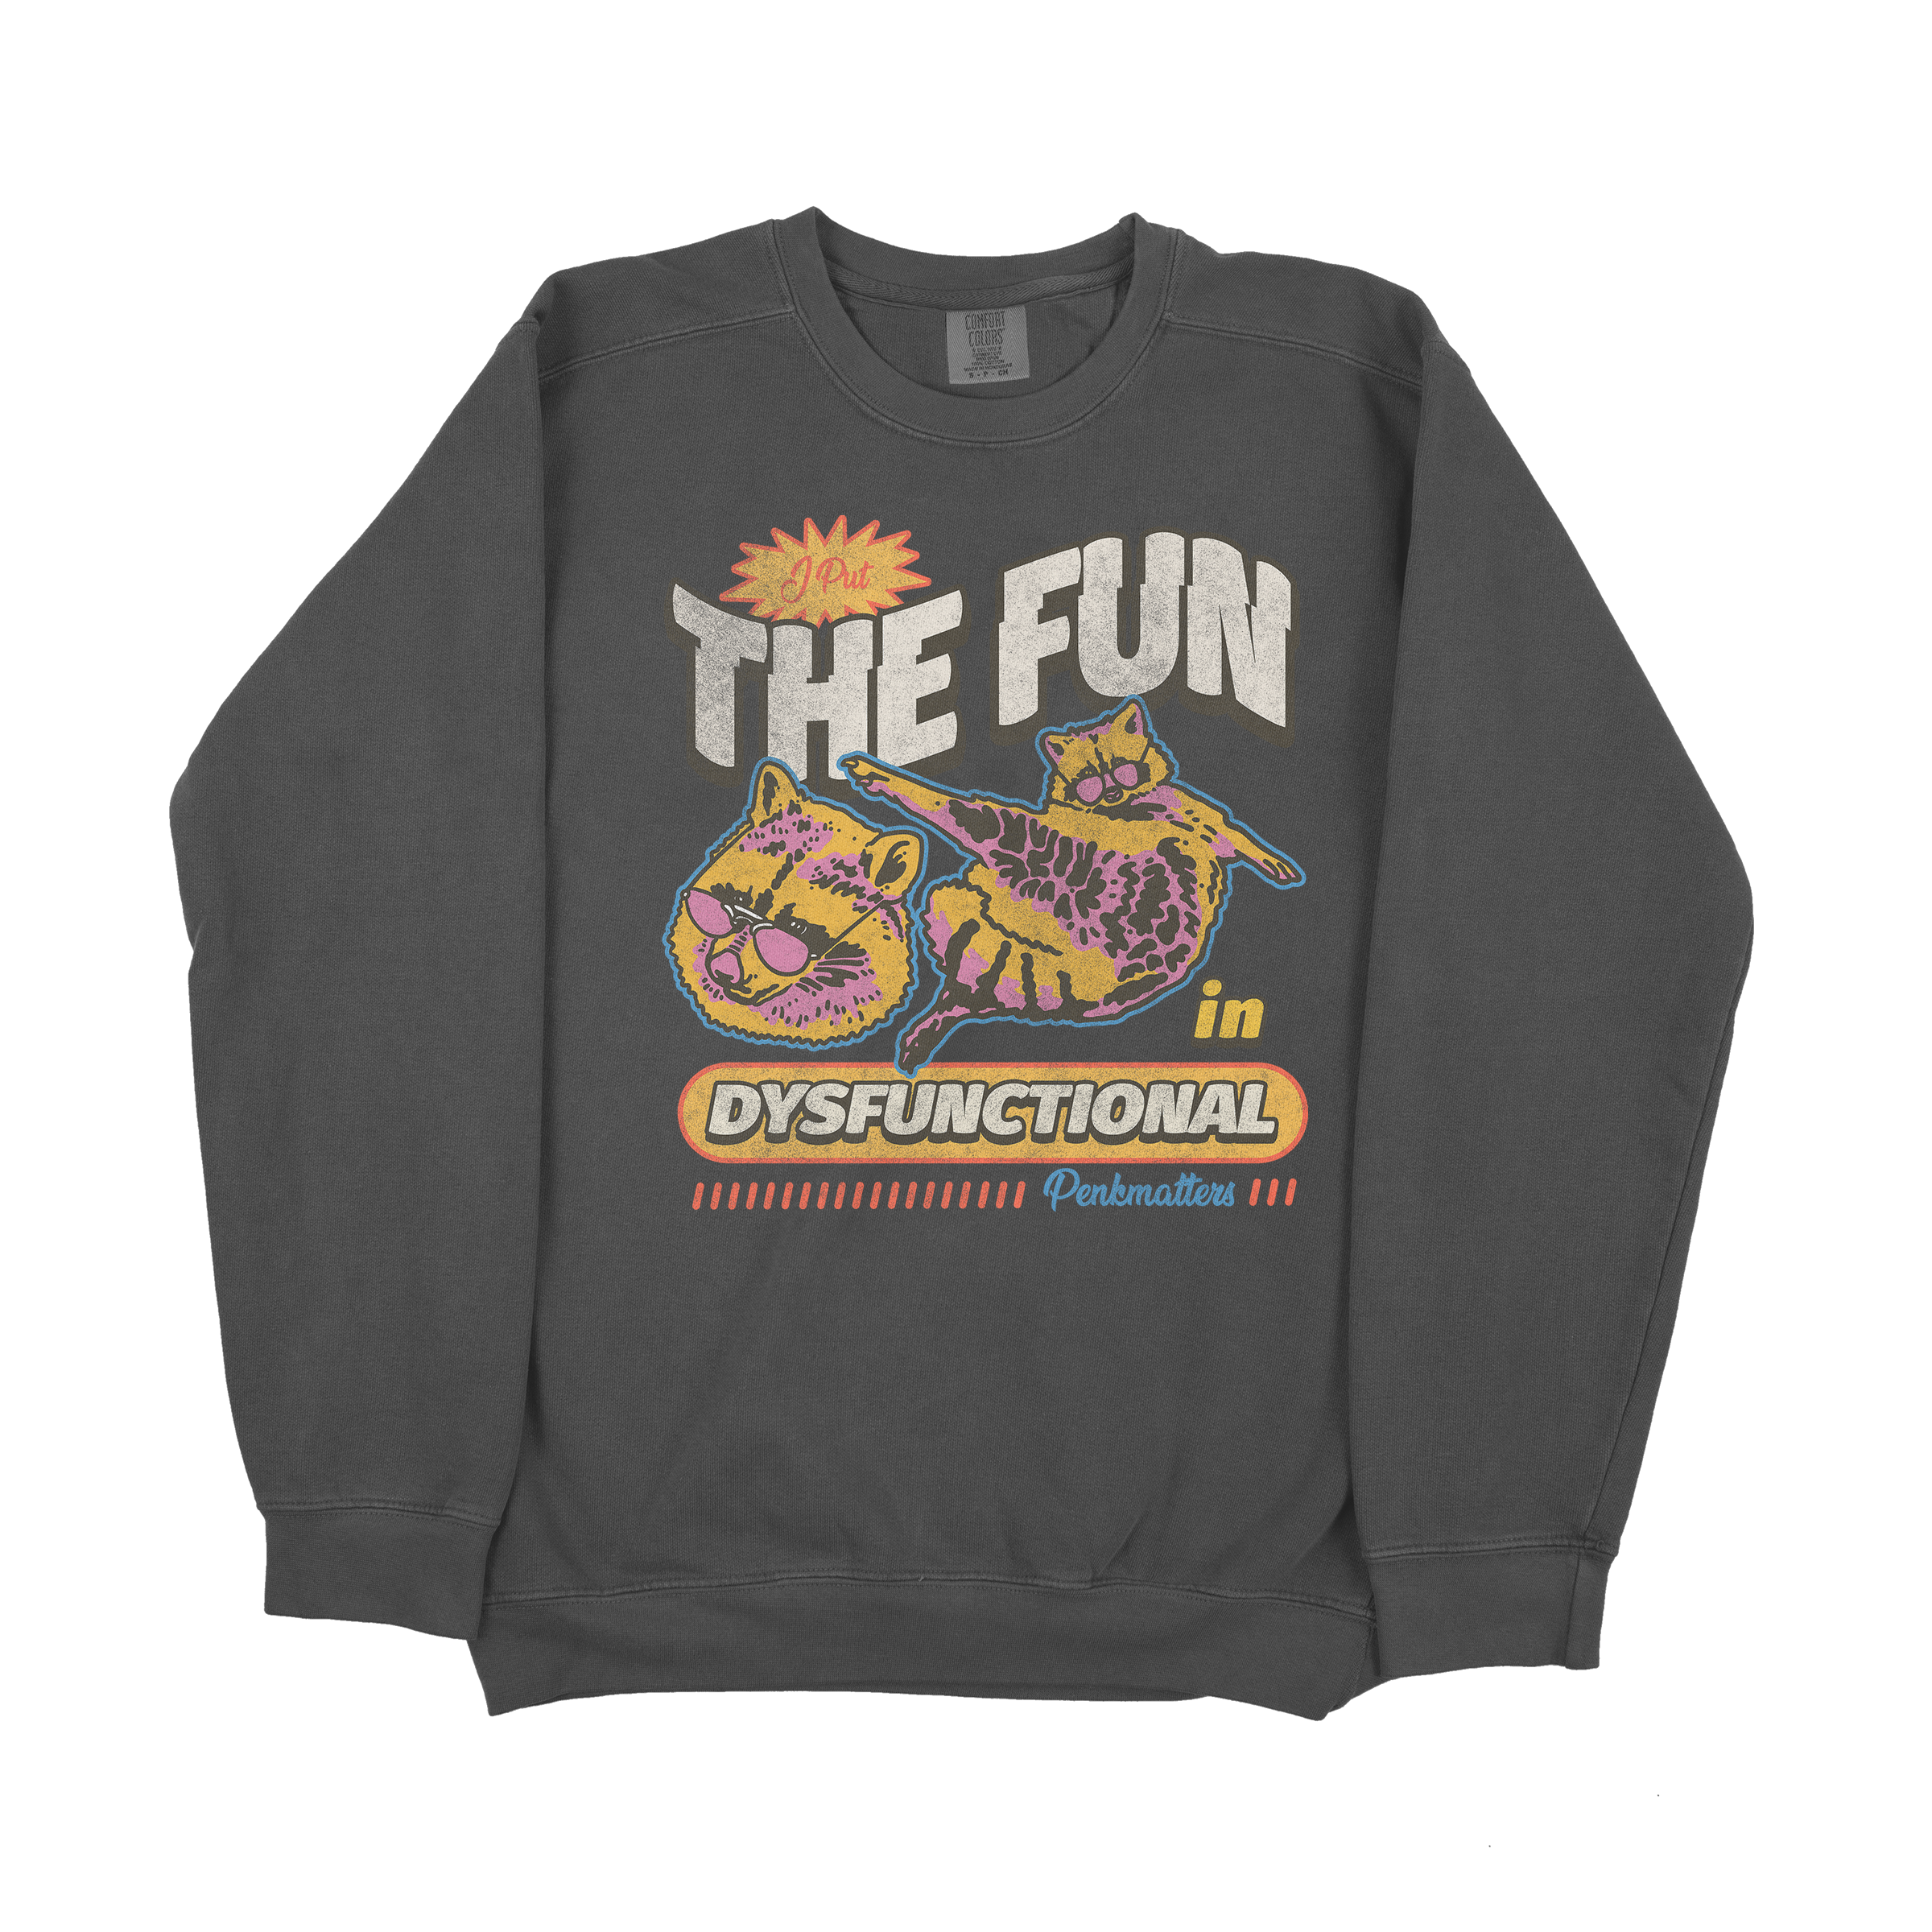 Explore more funny and cool graphic sweatshirts.